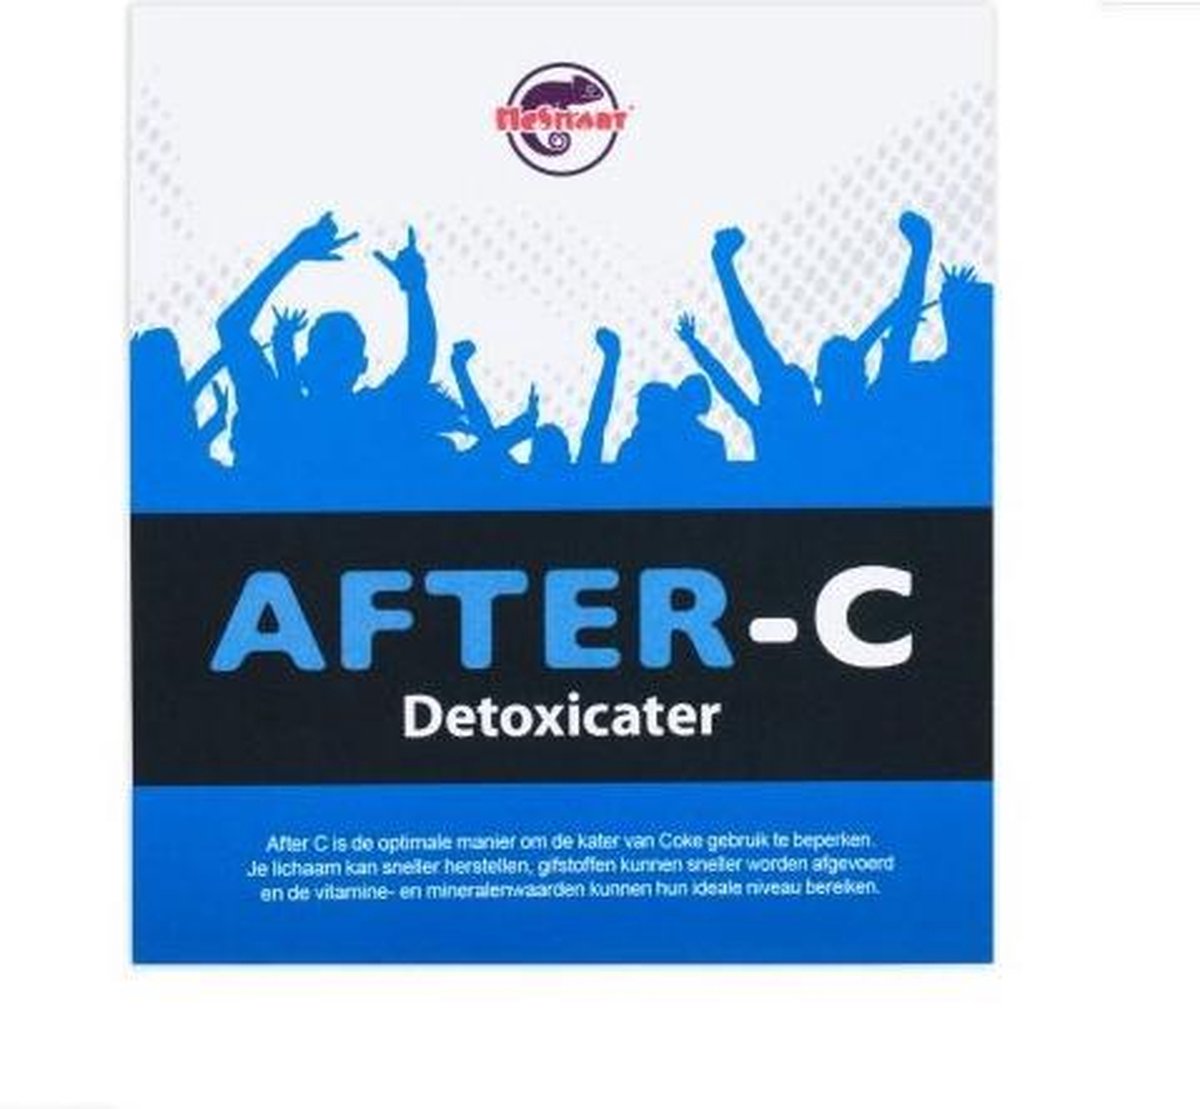 After-C